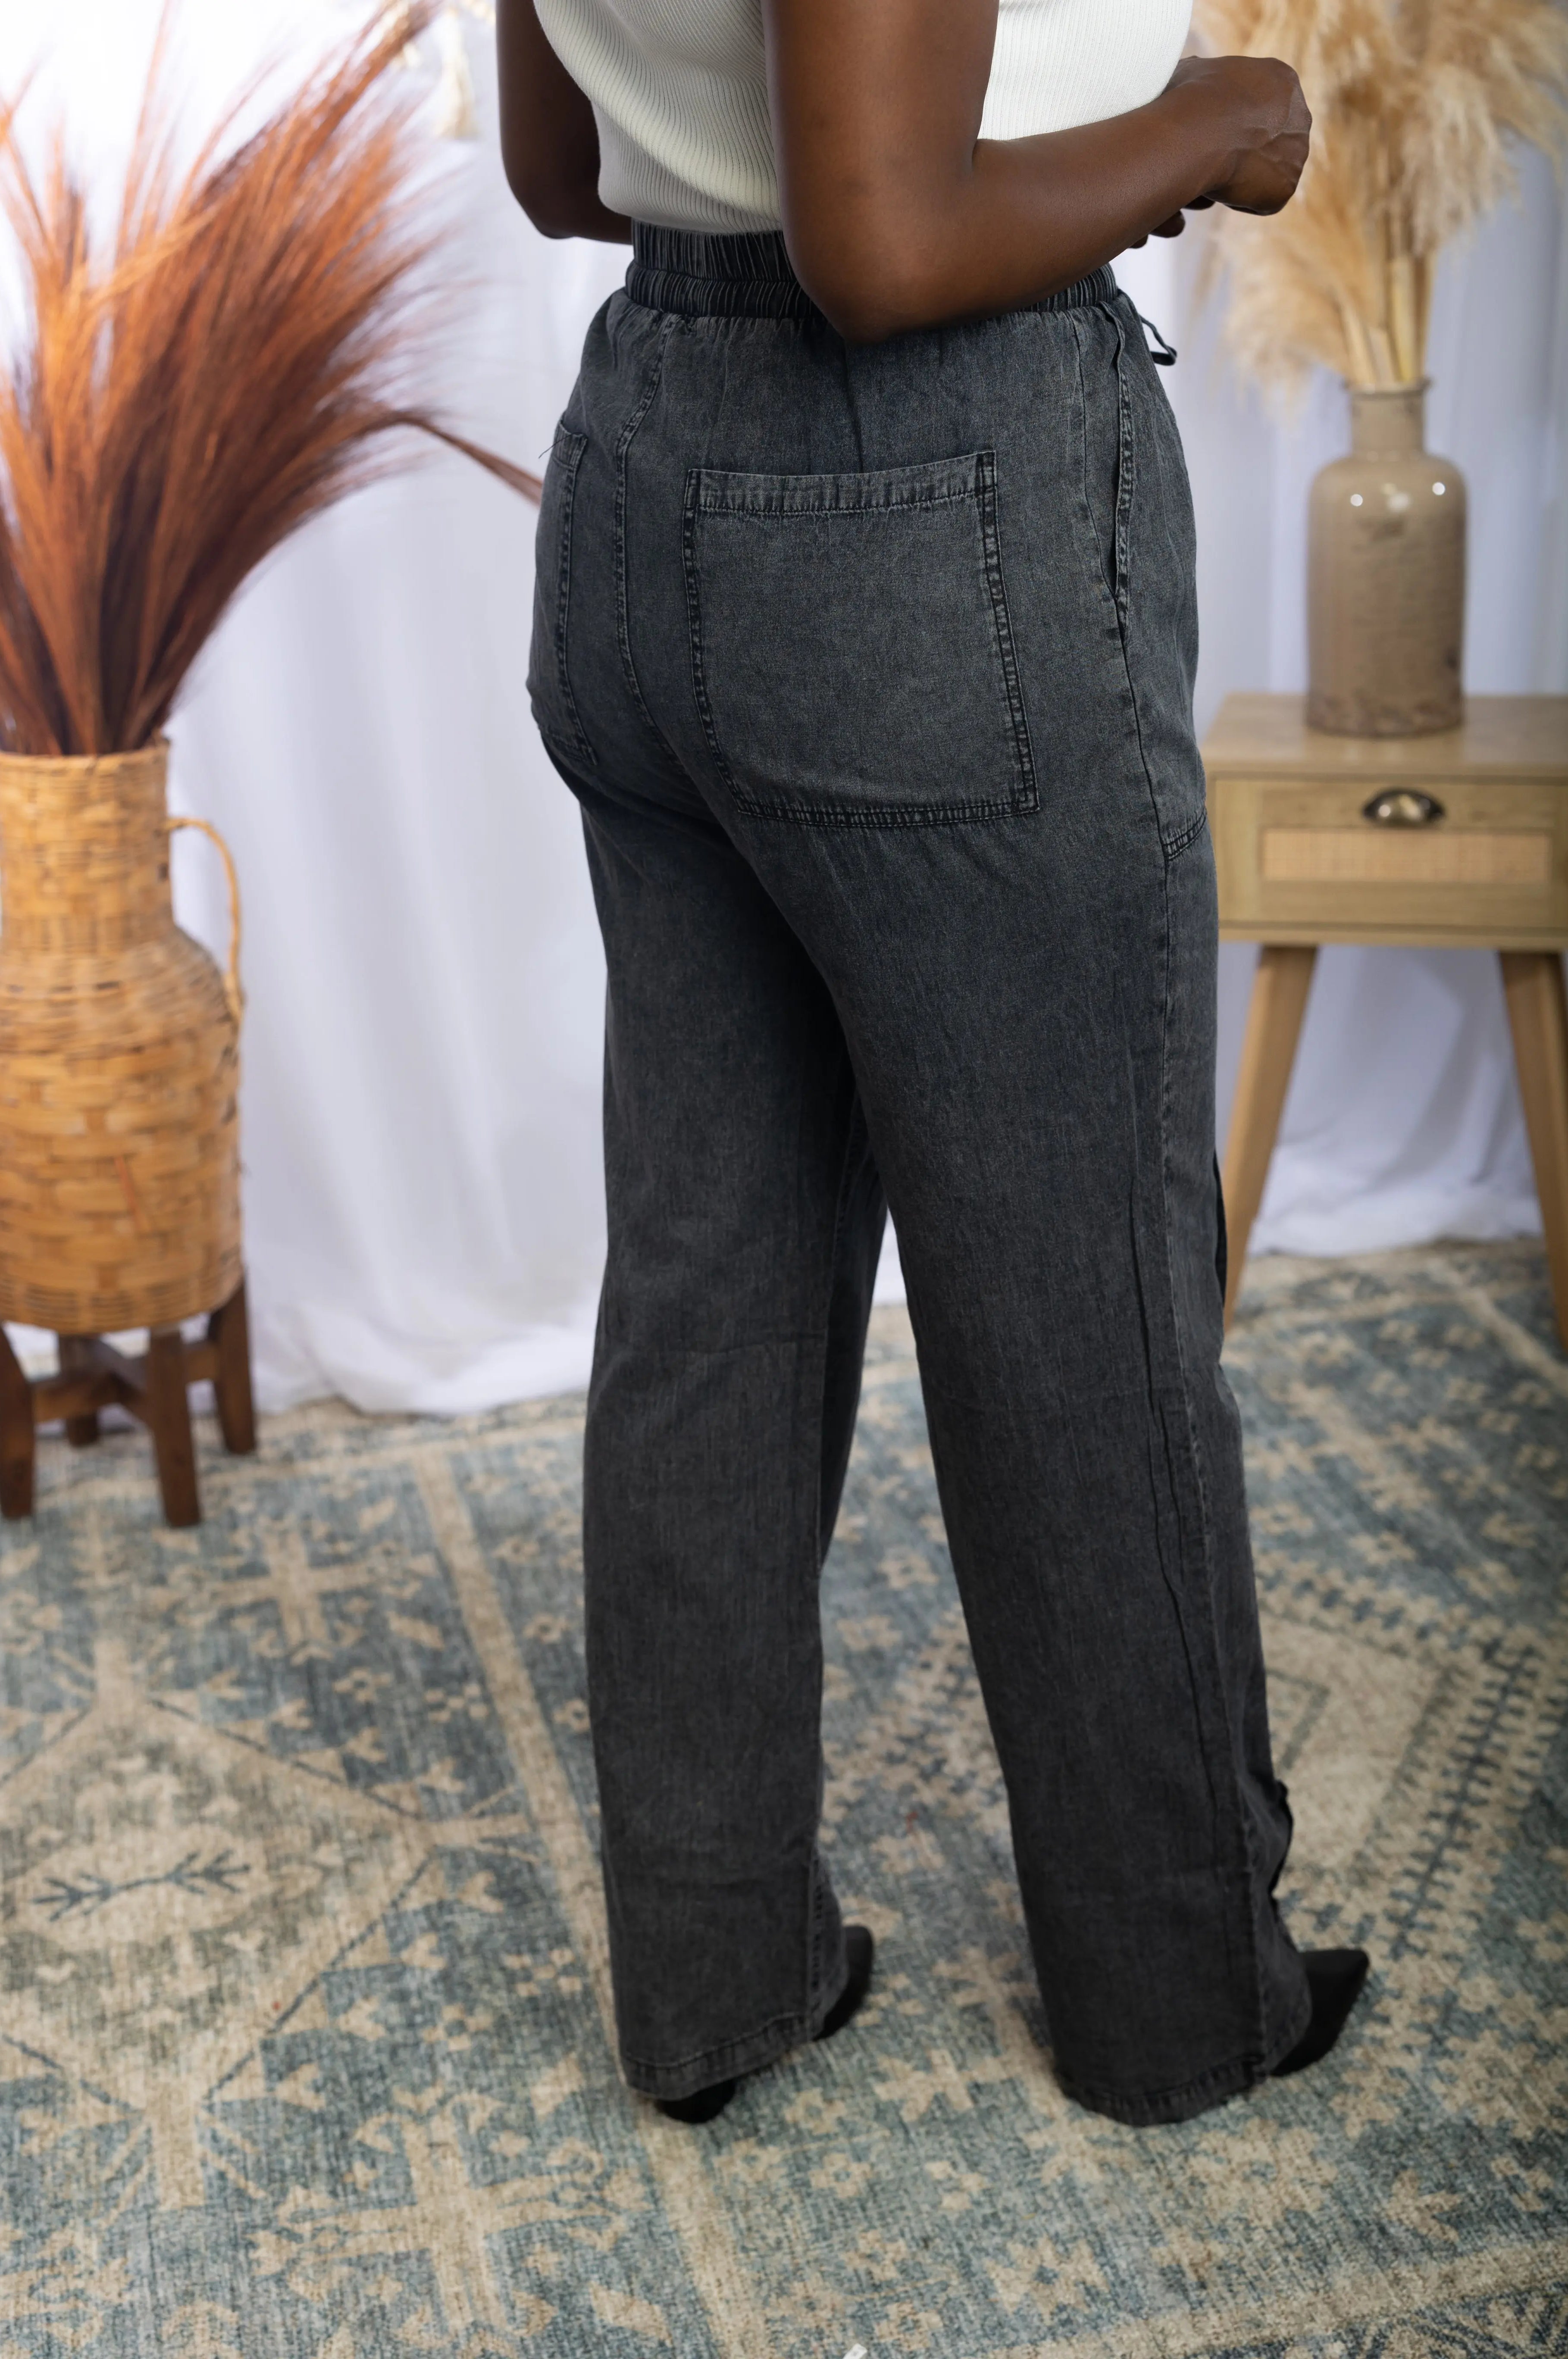 Relax & Unwind - Chambray Pants Boutique Simplified